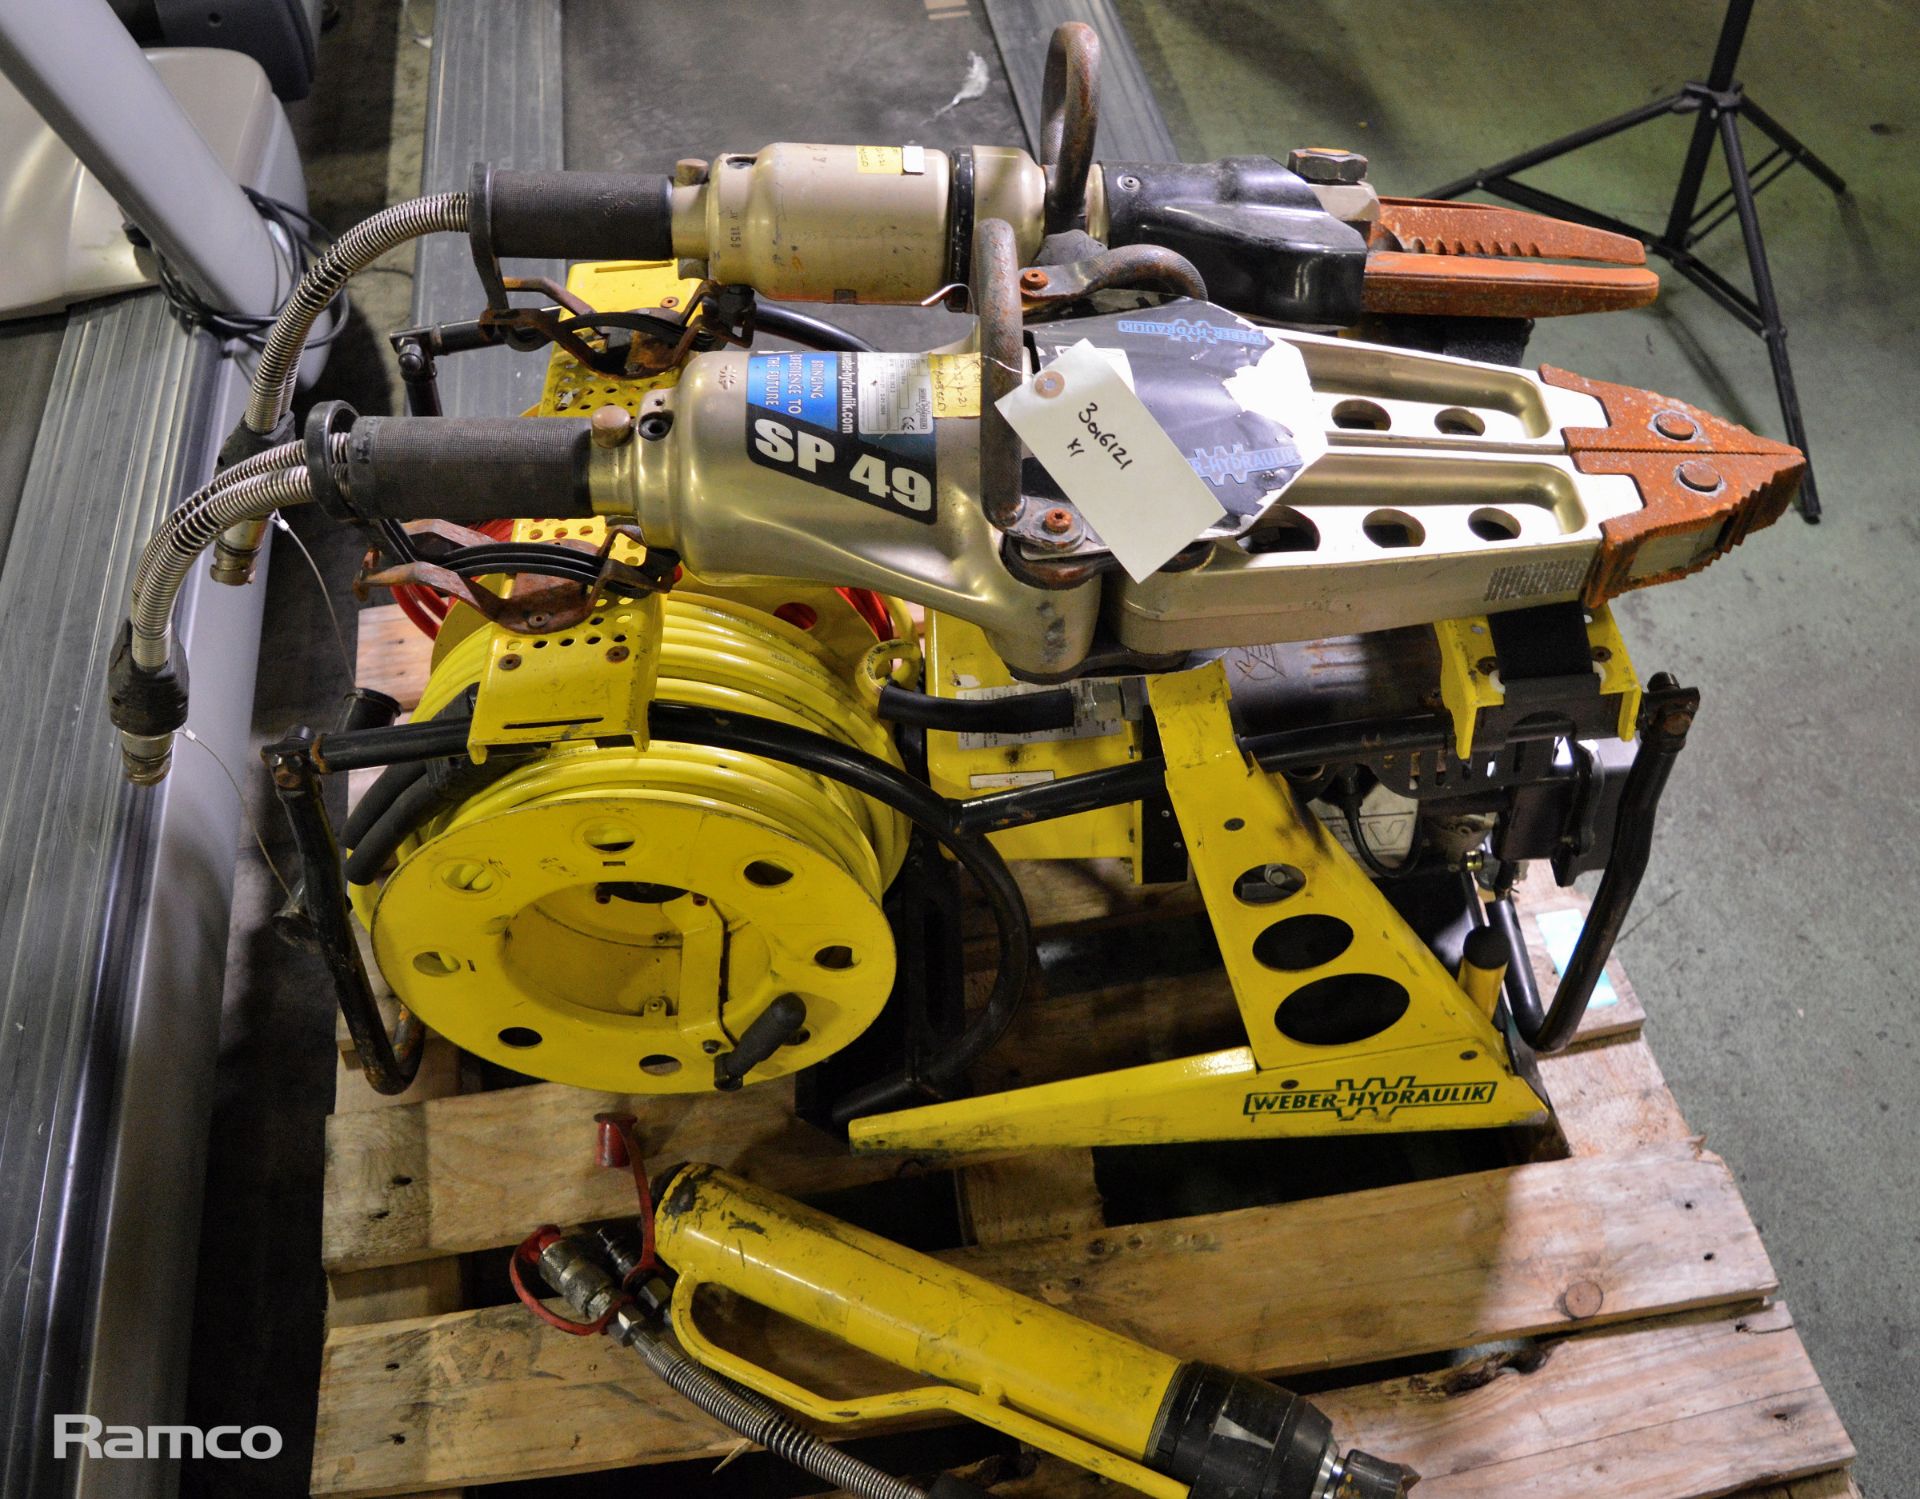 Weber Hydraulic Rescue Equipment & Accessories - Cutter, Spreader, Ram, Power pack & hoses - Image 3 of 9